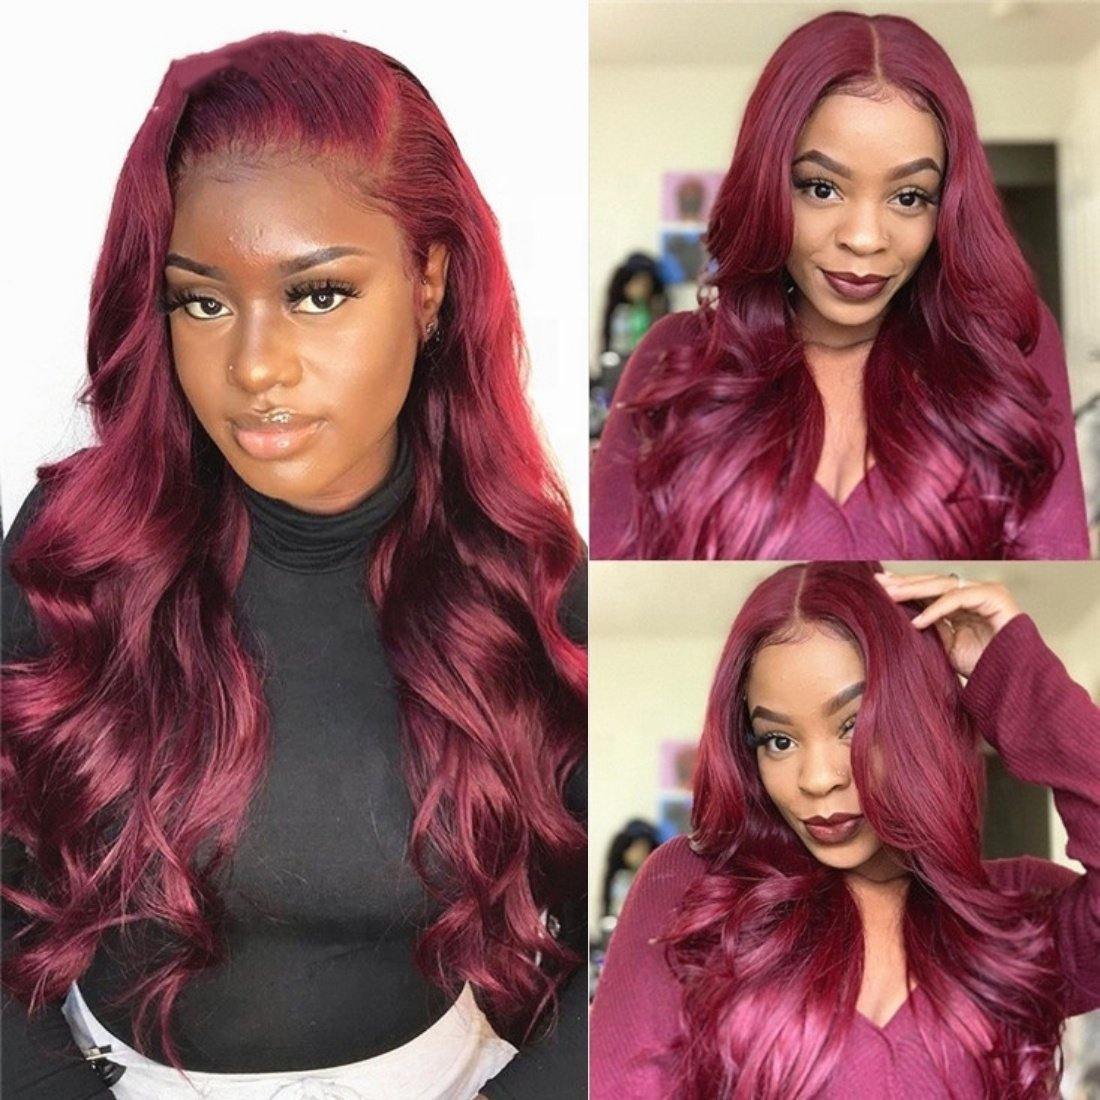 Transparent Lace Frontal Wigs #99j Color 13x4 Body Wave Virgin Human Hair Wig - Seyna Hair